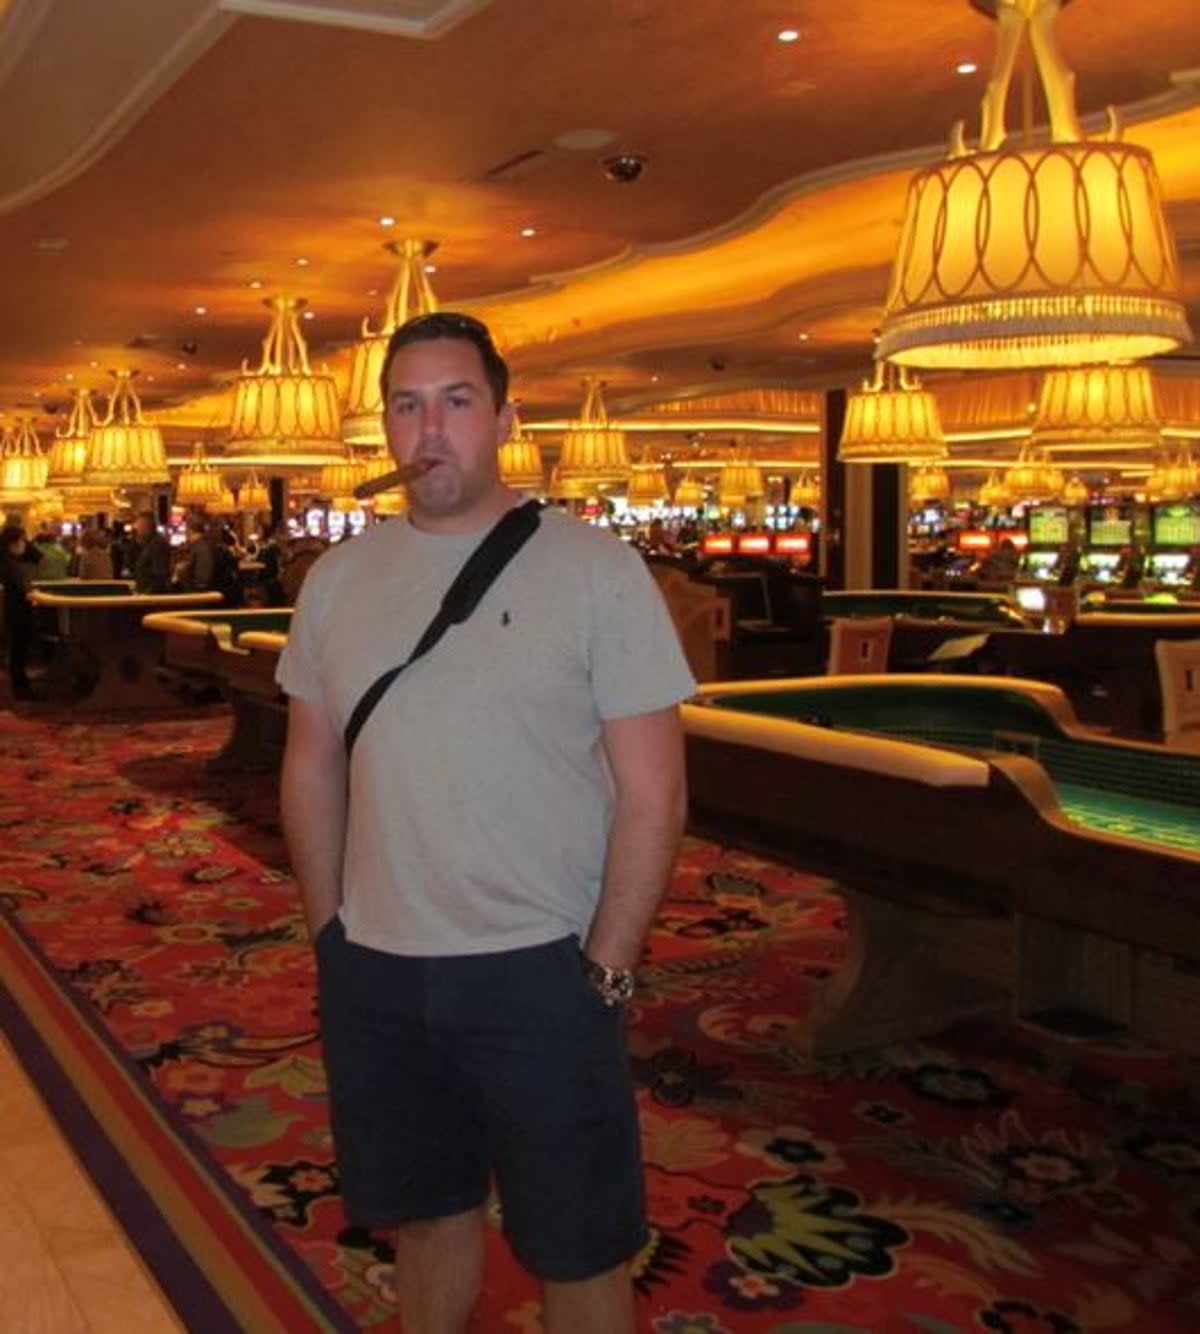 The 40-year-old said he was constantly “rationalising and normalising” his levels of gambling and ended up gambling away more than £5 million (Mark Bradshaw)